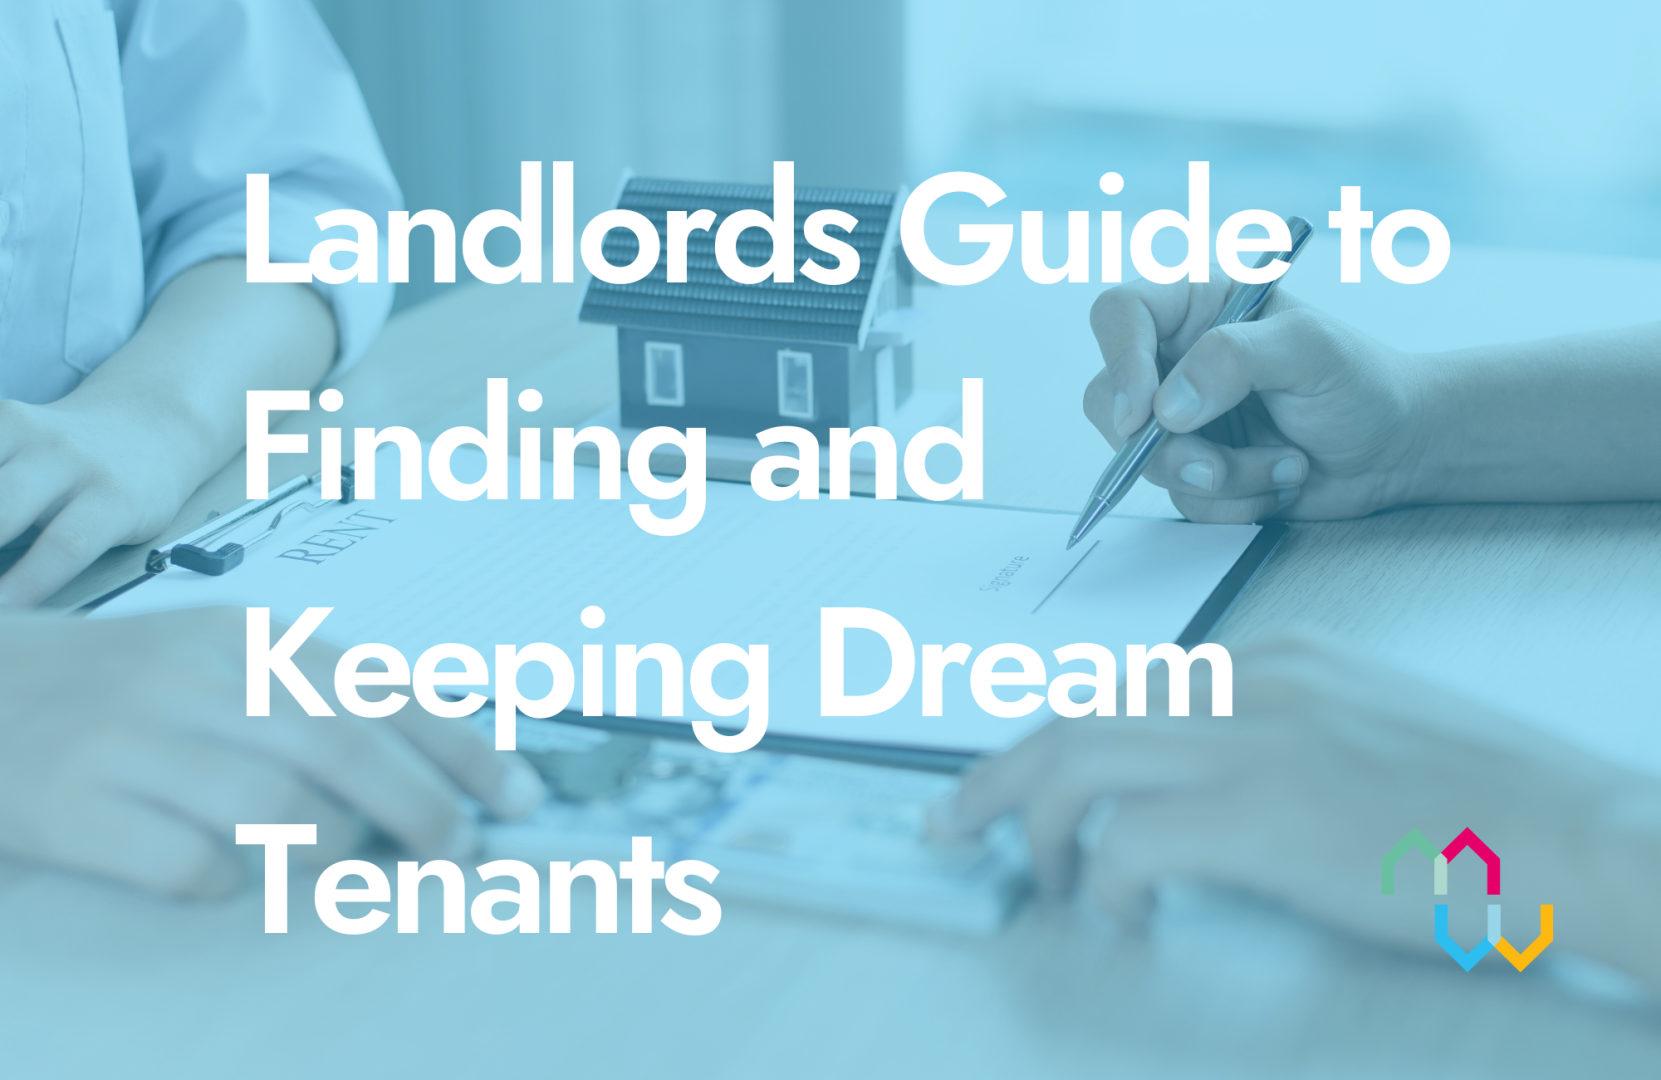 Guide to Finding and Keeping Dream Tenants